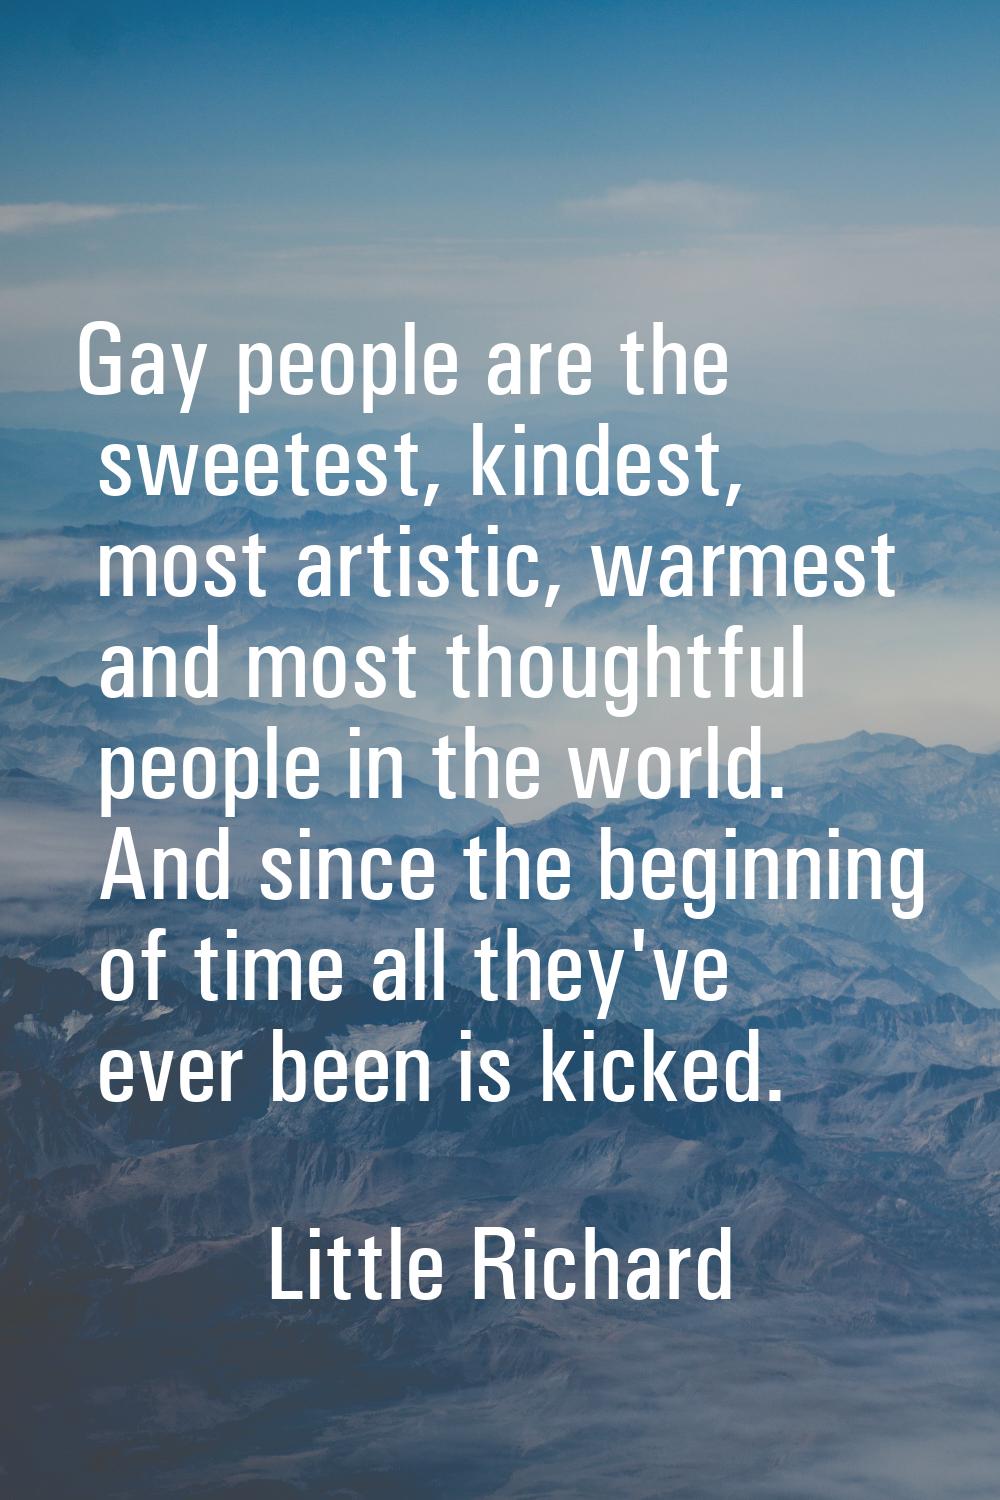 Gay people are the sweetest, kindest, most artistic, warmest and most thoughtful people in the worl